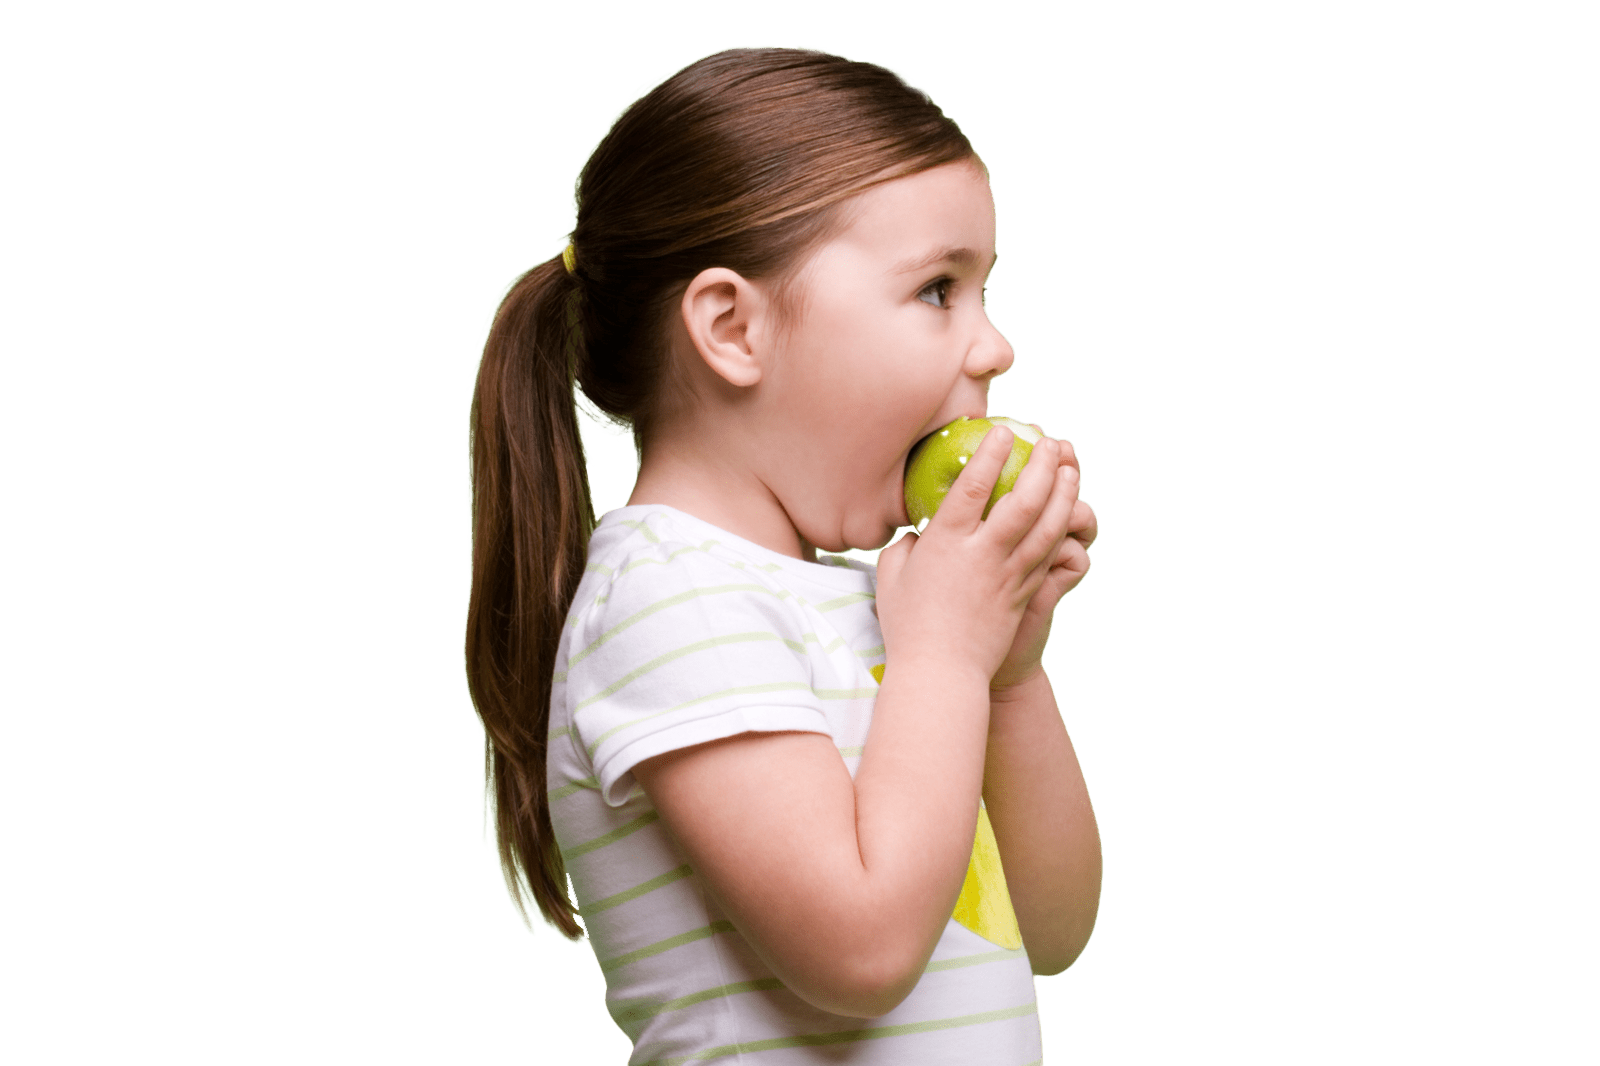 Young girl taking a bite of an apple